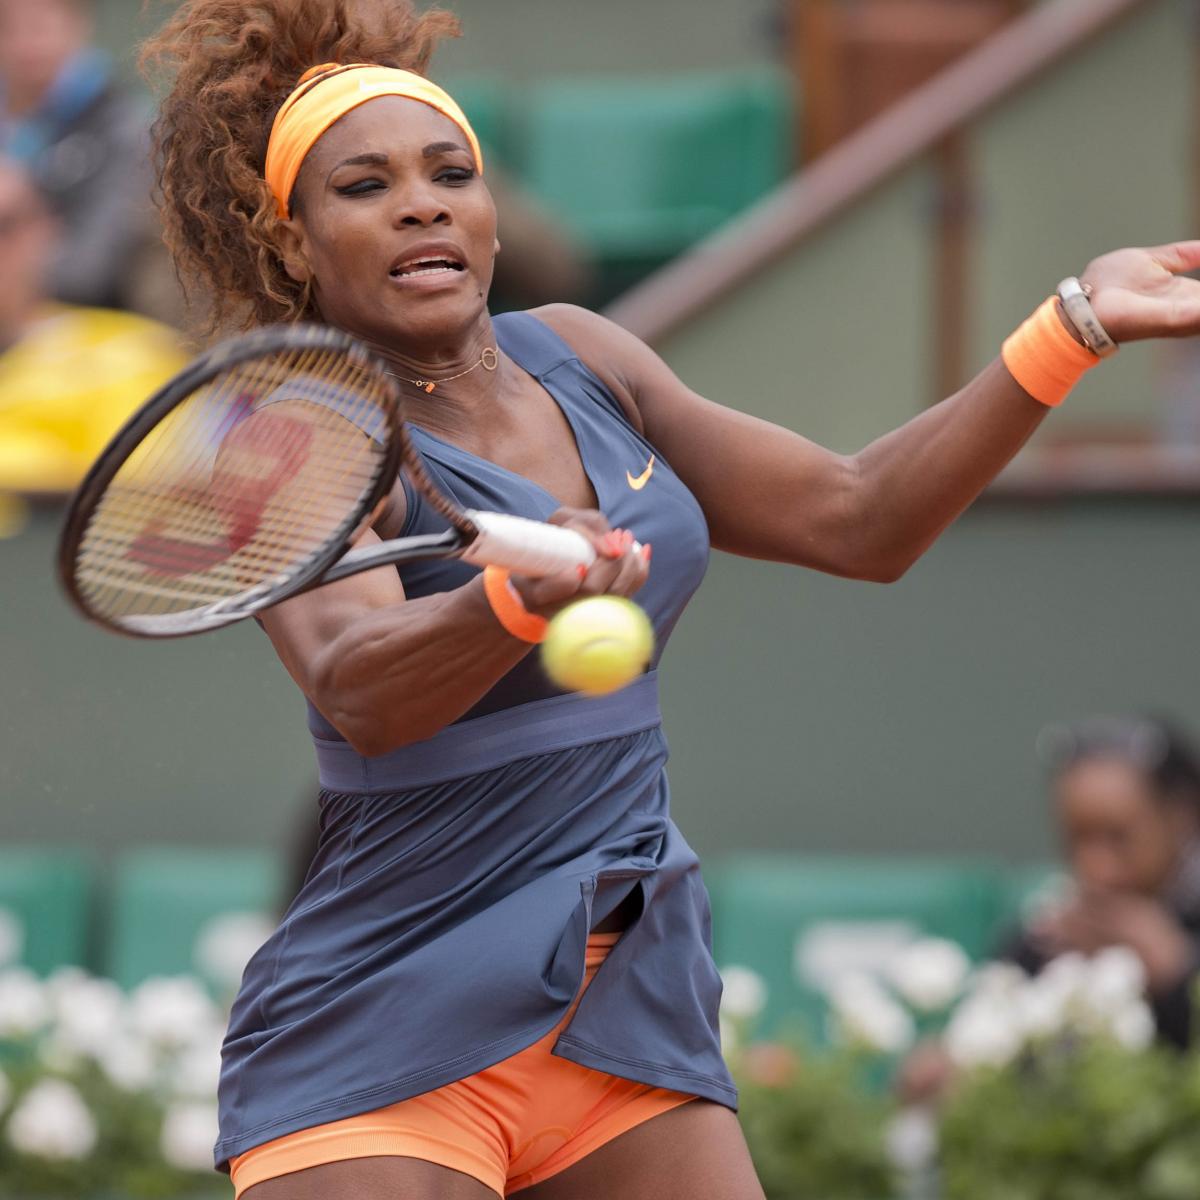 French Open 2013 Results: Serena Williams and Top Stars Dominating